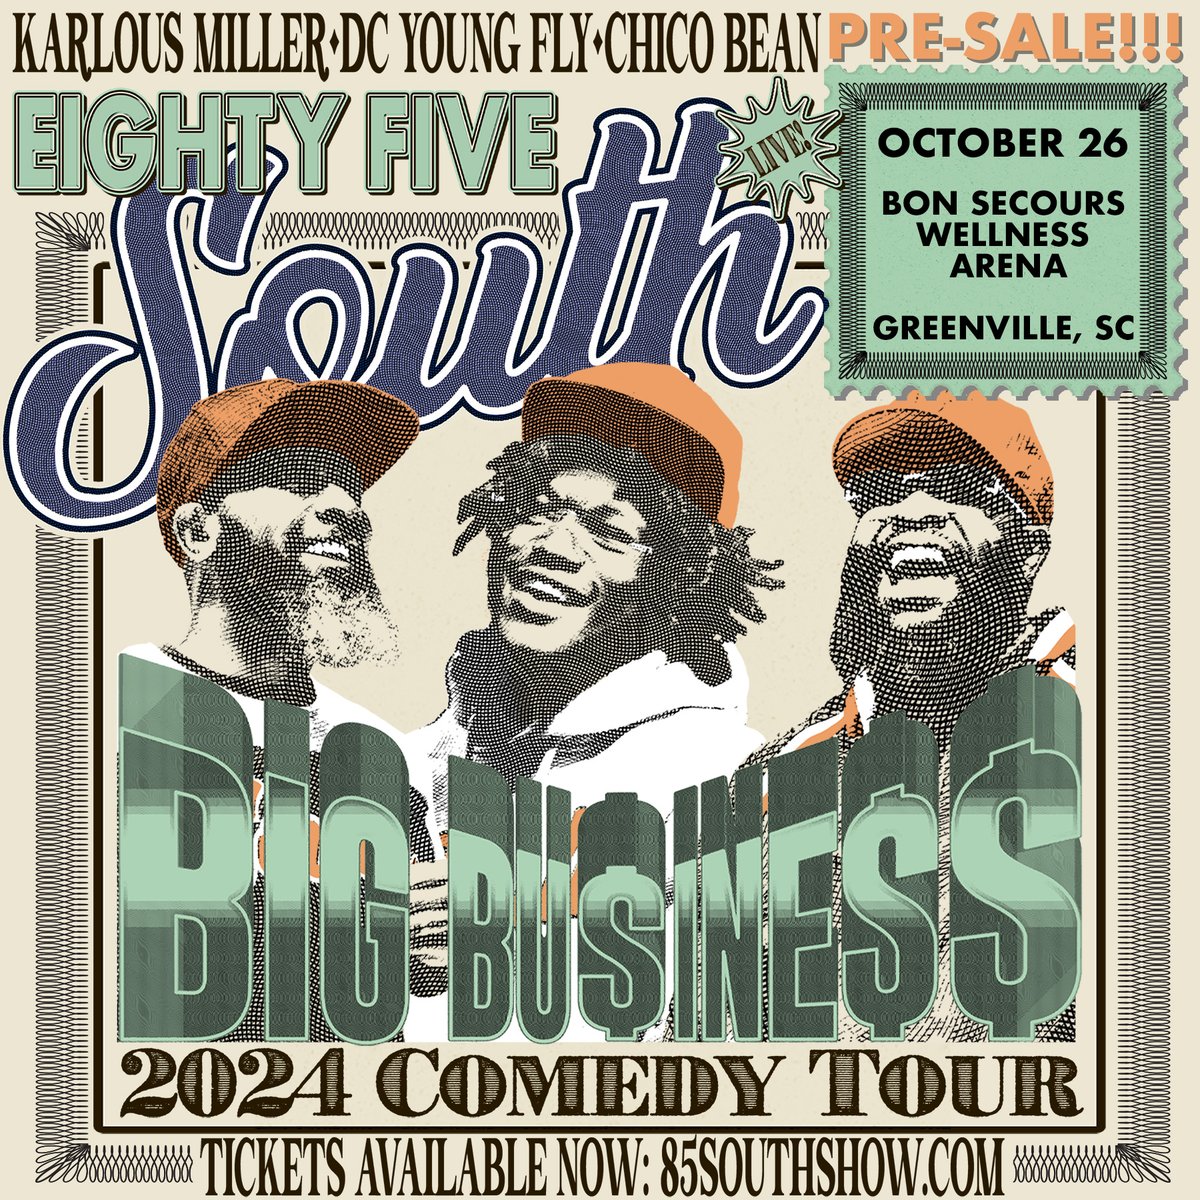 ON SALE NOW: 85southshow is making a stop at The Well October 26! Get tickets now to see DC Young Fly, Chico Bean, and Karlous Miller on the Big Business Comedy Tour this fall. Tickets available for purchase online via Ticketmaster and at The GSP Airport Box Office.